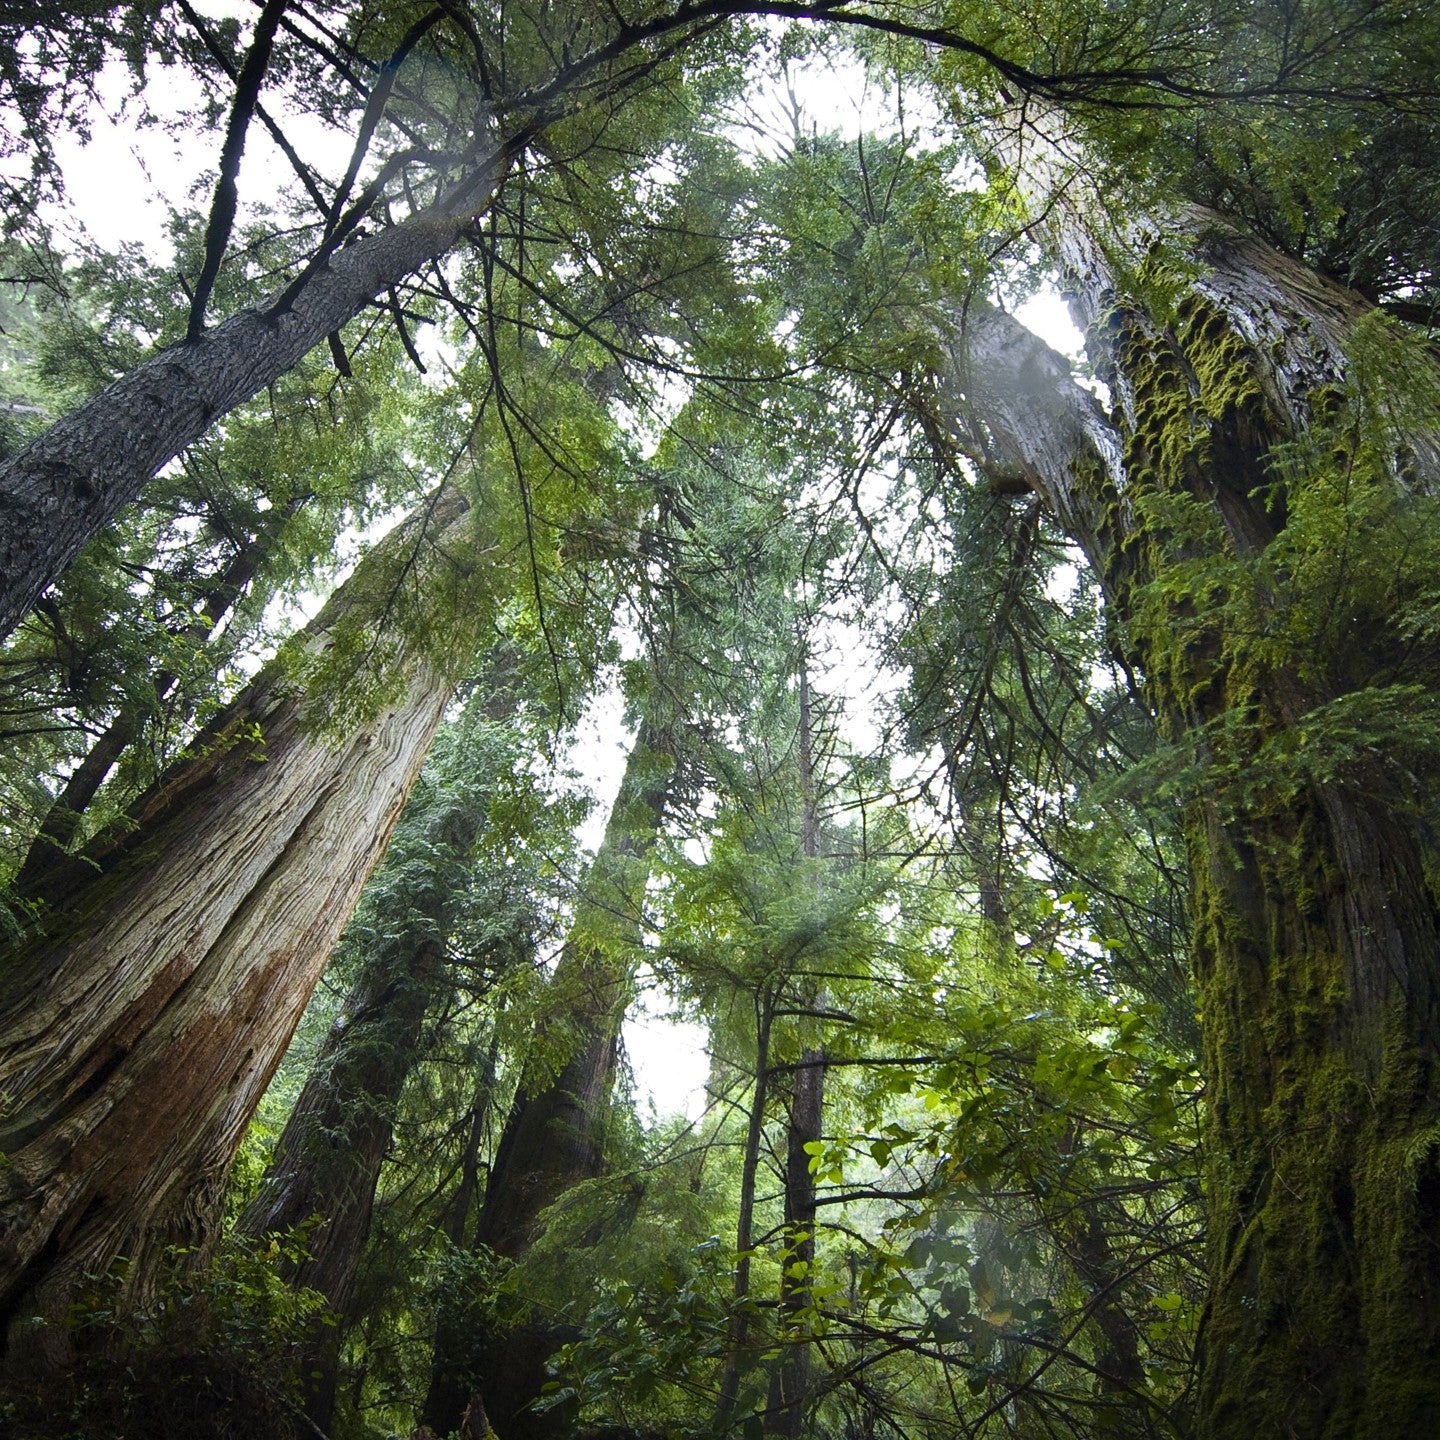 Trees in the Great Bear Rainforest, British Columbia, Canada